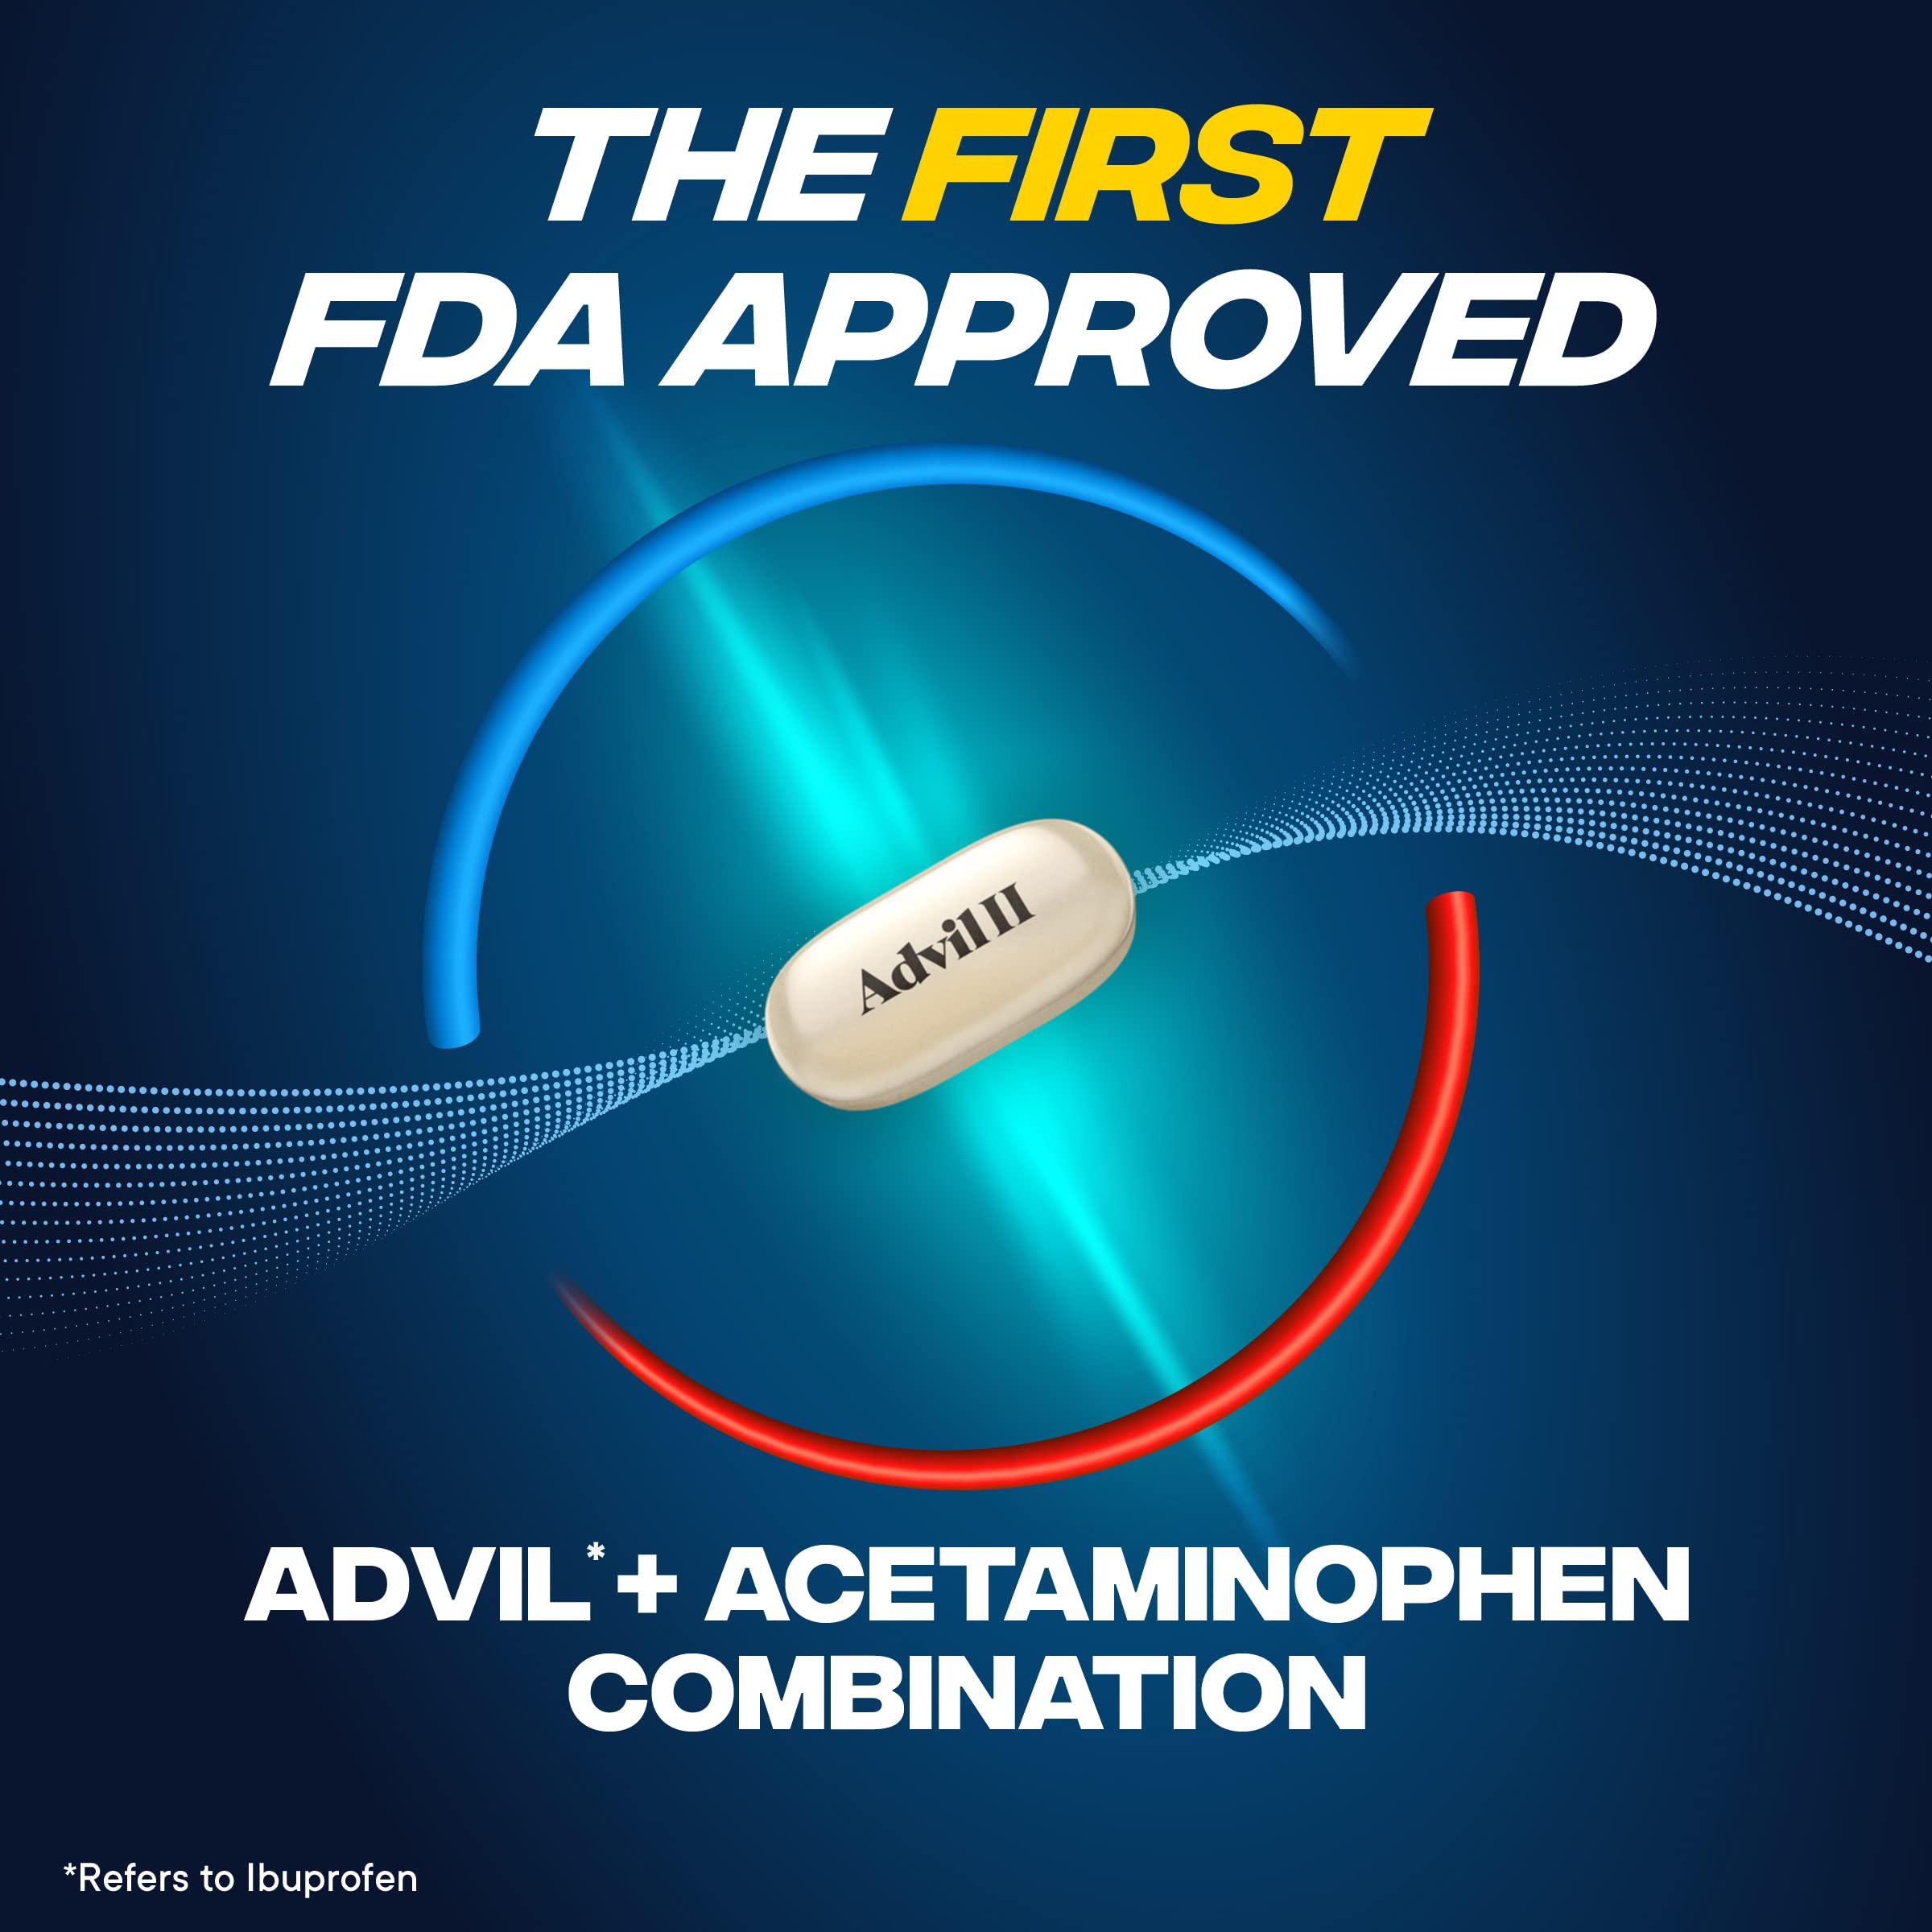 Advil Dual Action With Acetaminophen And Ibuprofen (2 Dose Equivalent) For 8 Hour Pain Relief, Coated 144 Ct Caplets And 2 Ct. Sample Of Advil PM